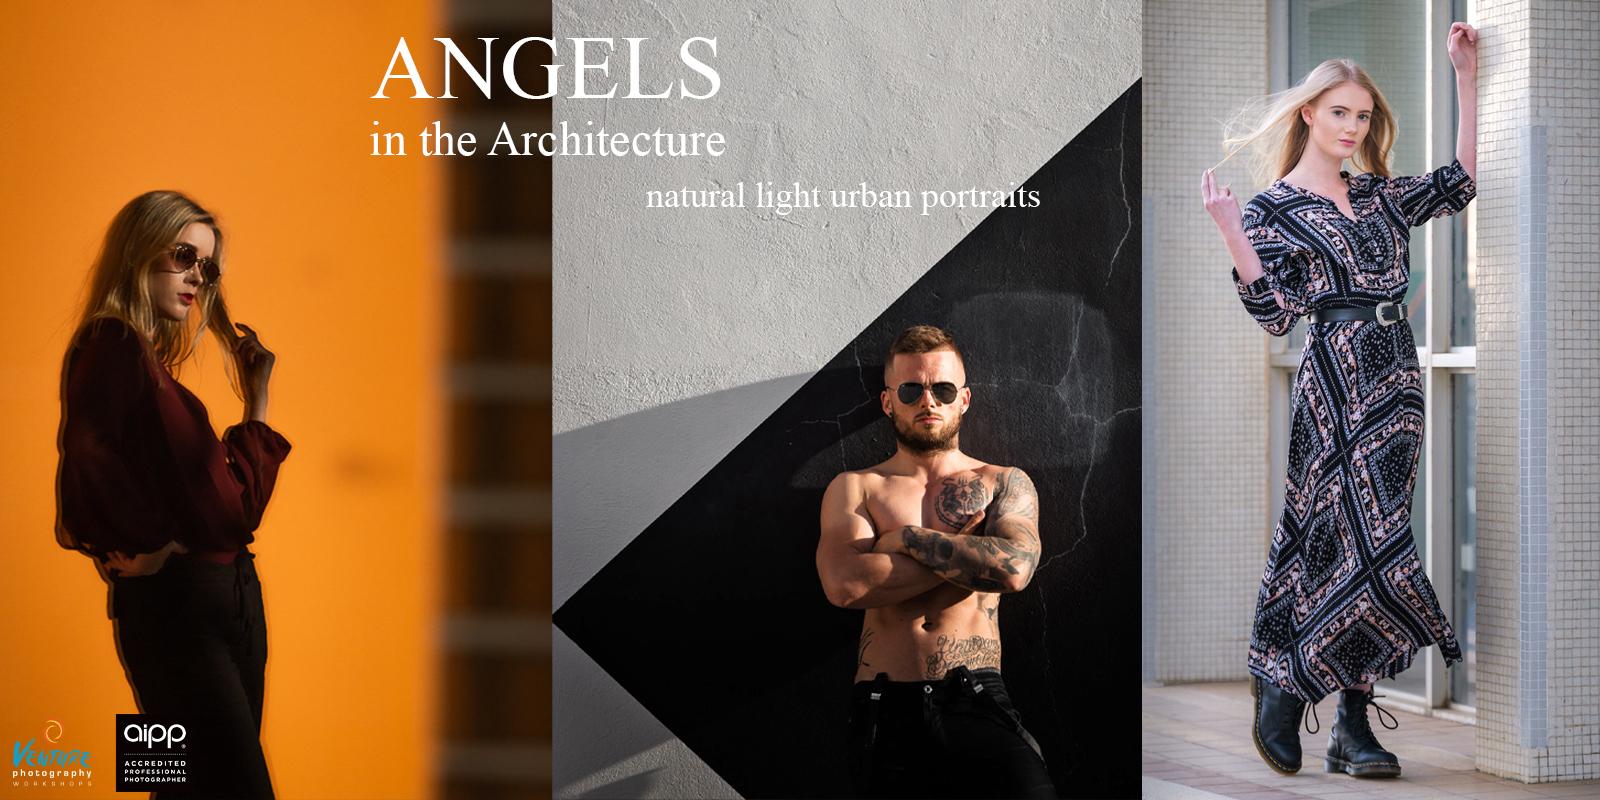 Angels in the Architecture (September 2020)